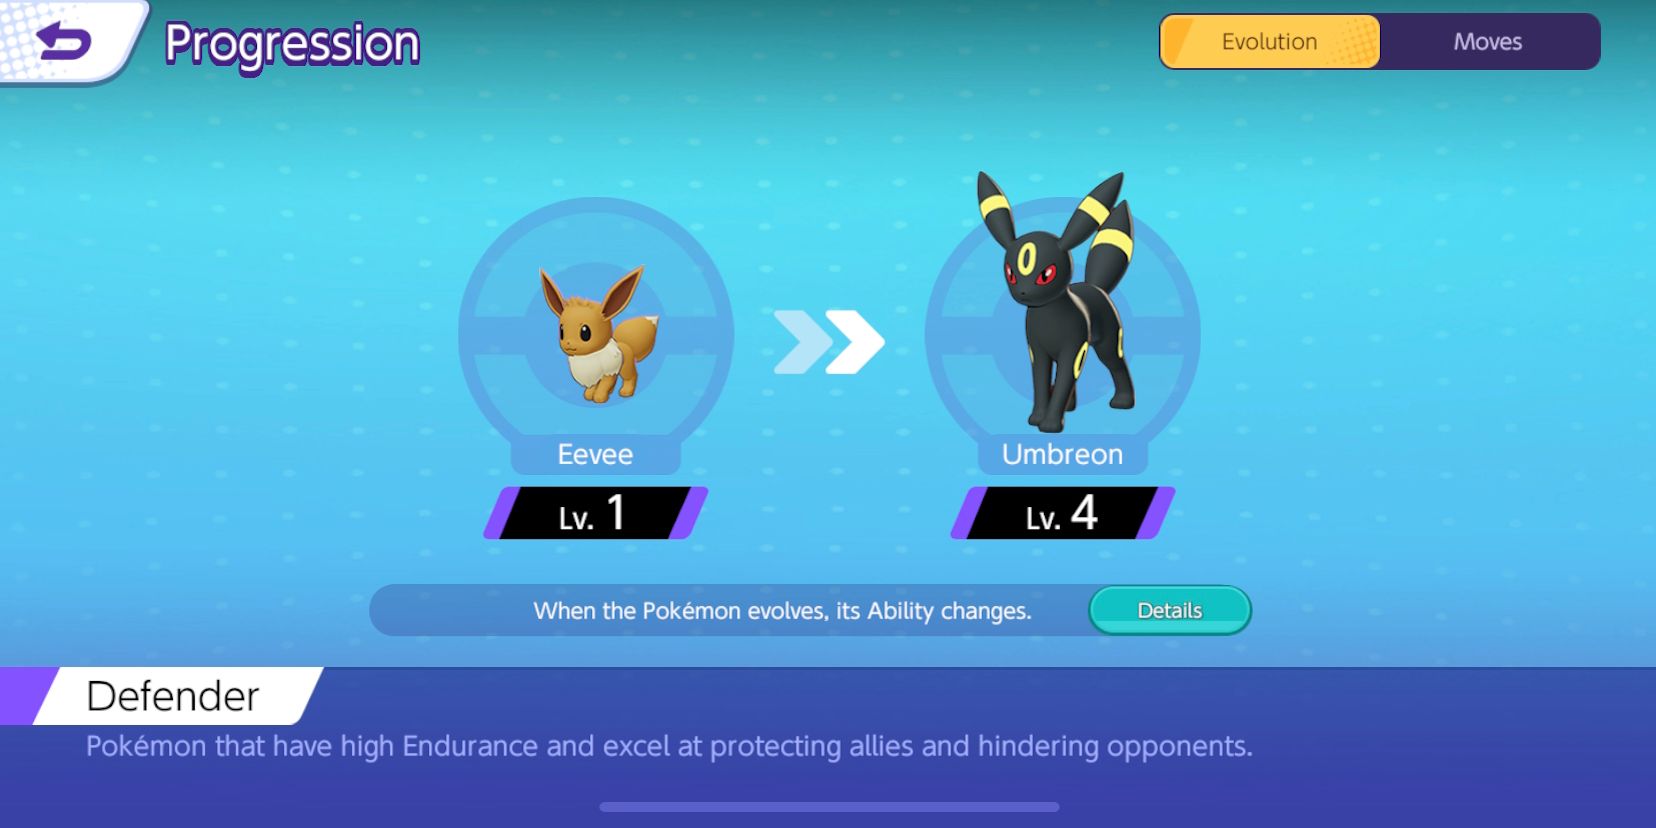 Umbreon Progression screen from Pokemon Unite, showing what level it evolves from Eevee